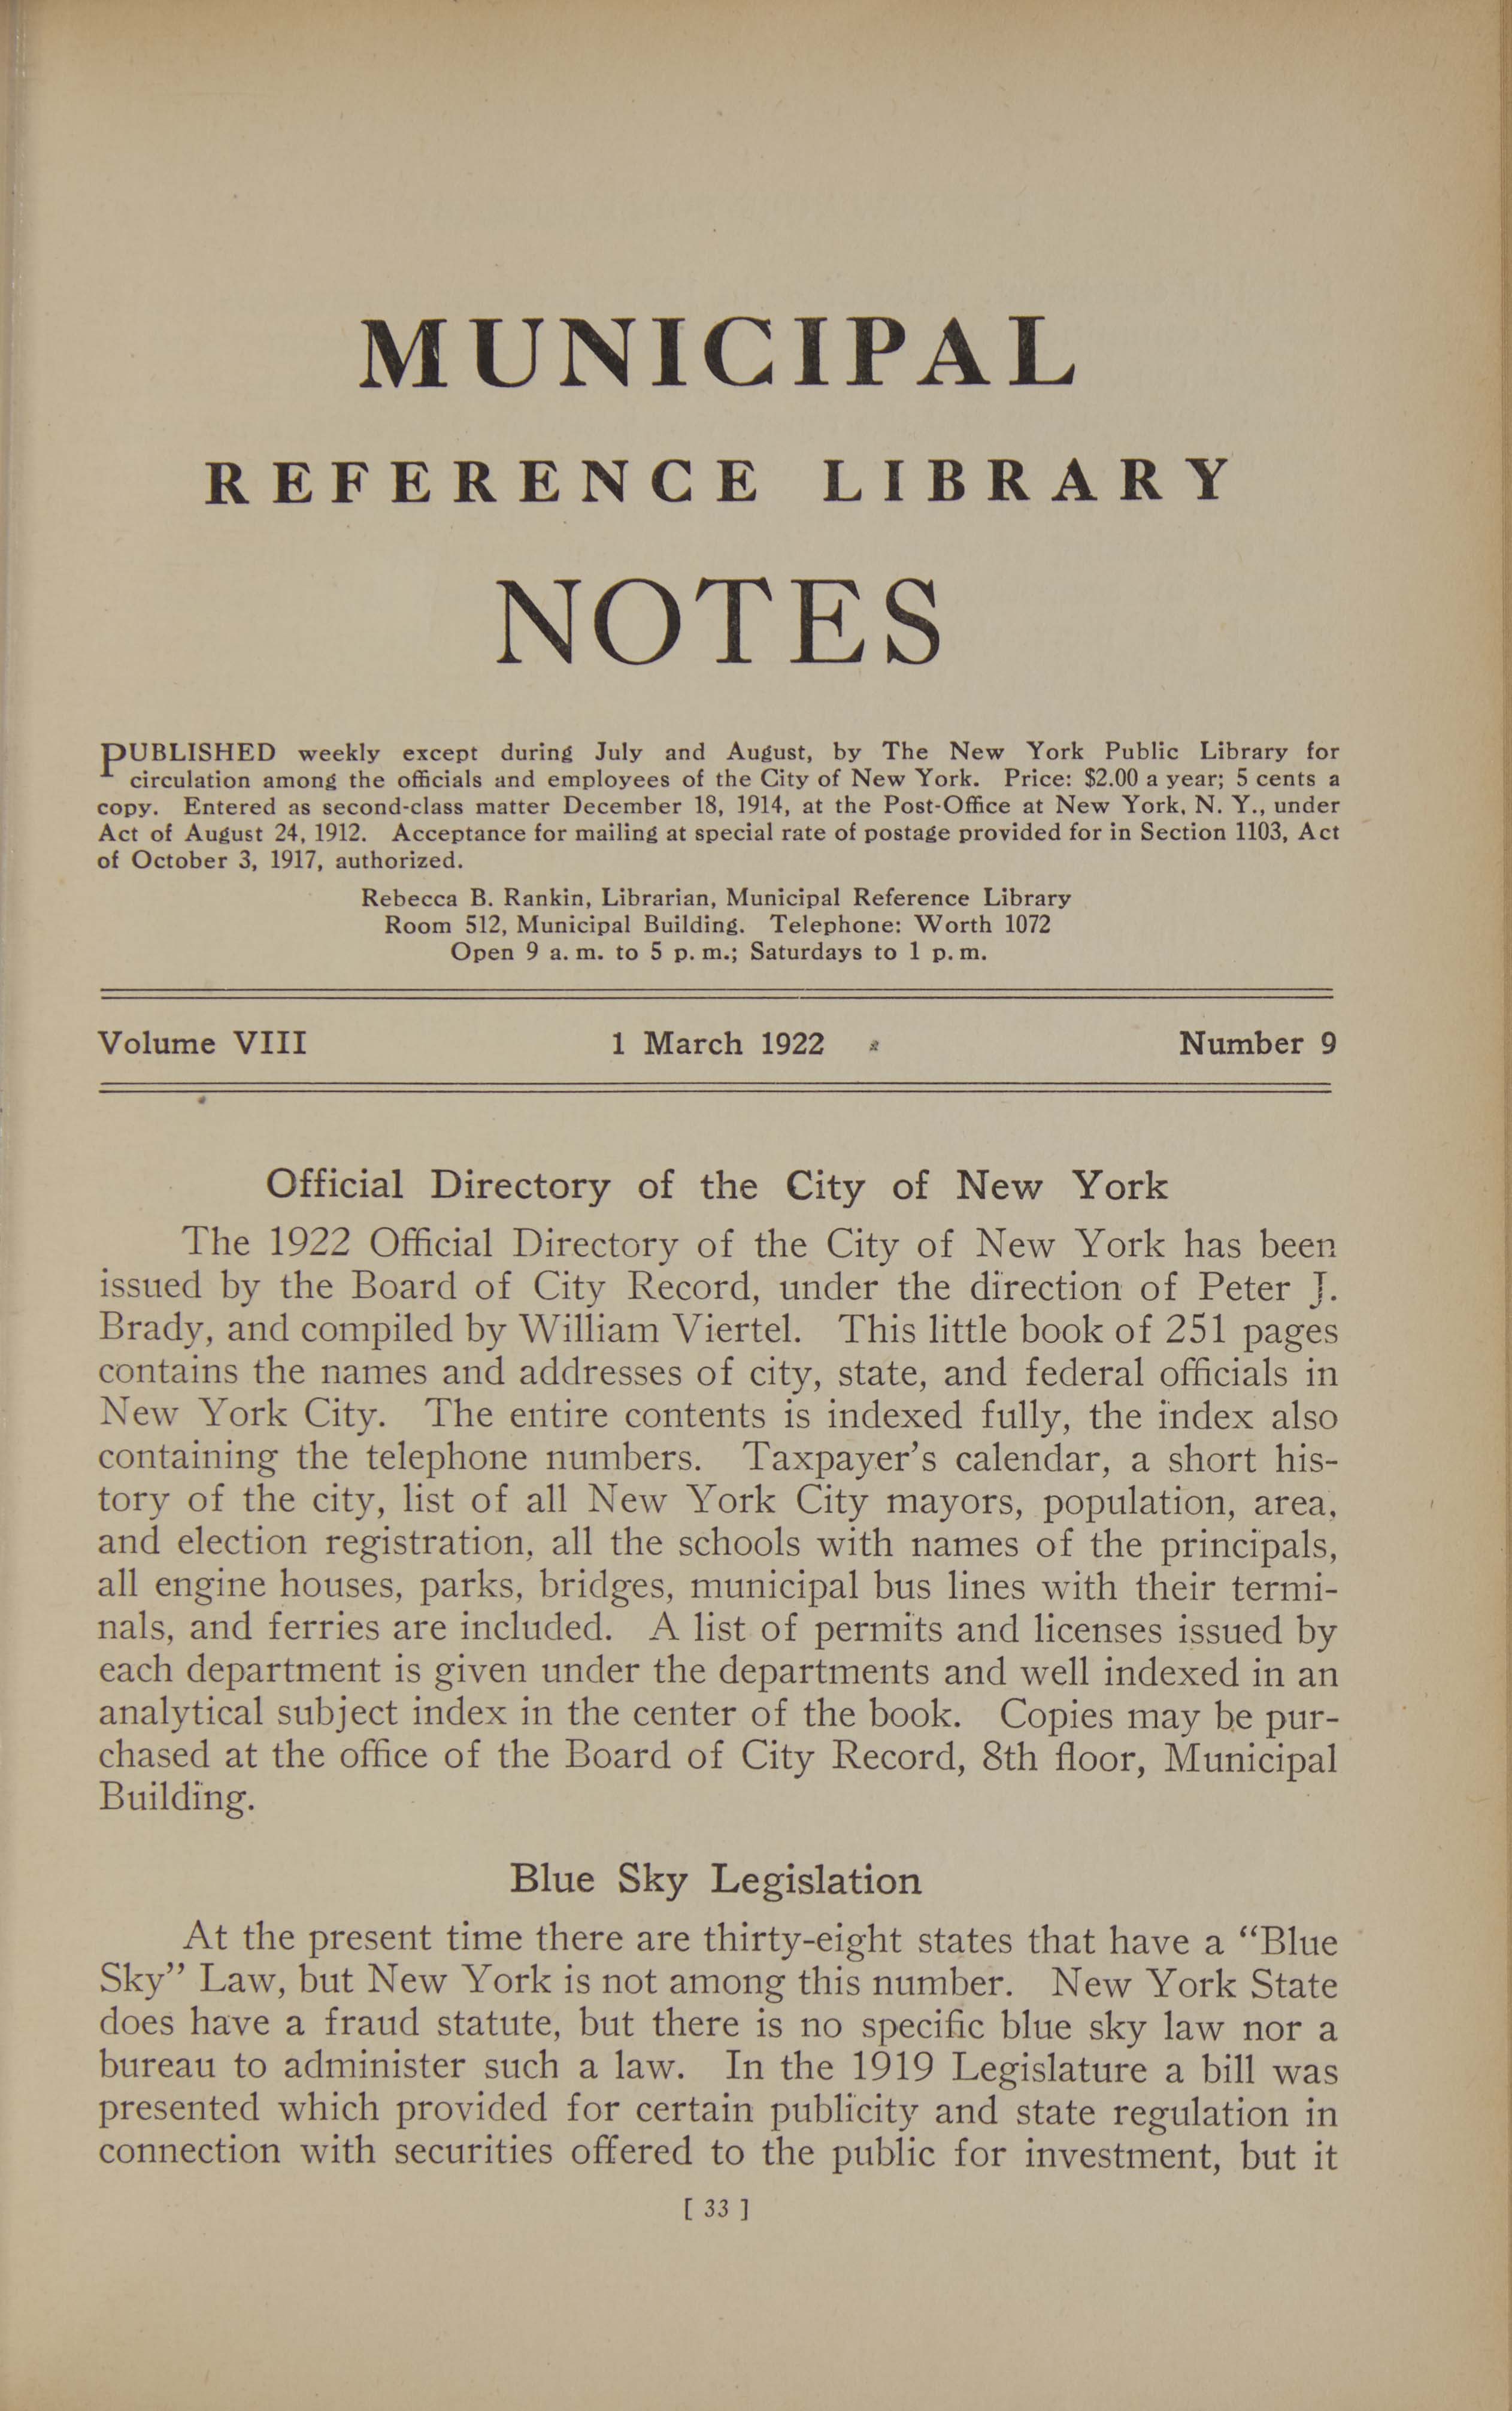 A page from the March 1922 Municpal Reference Libray Notes